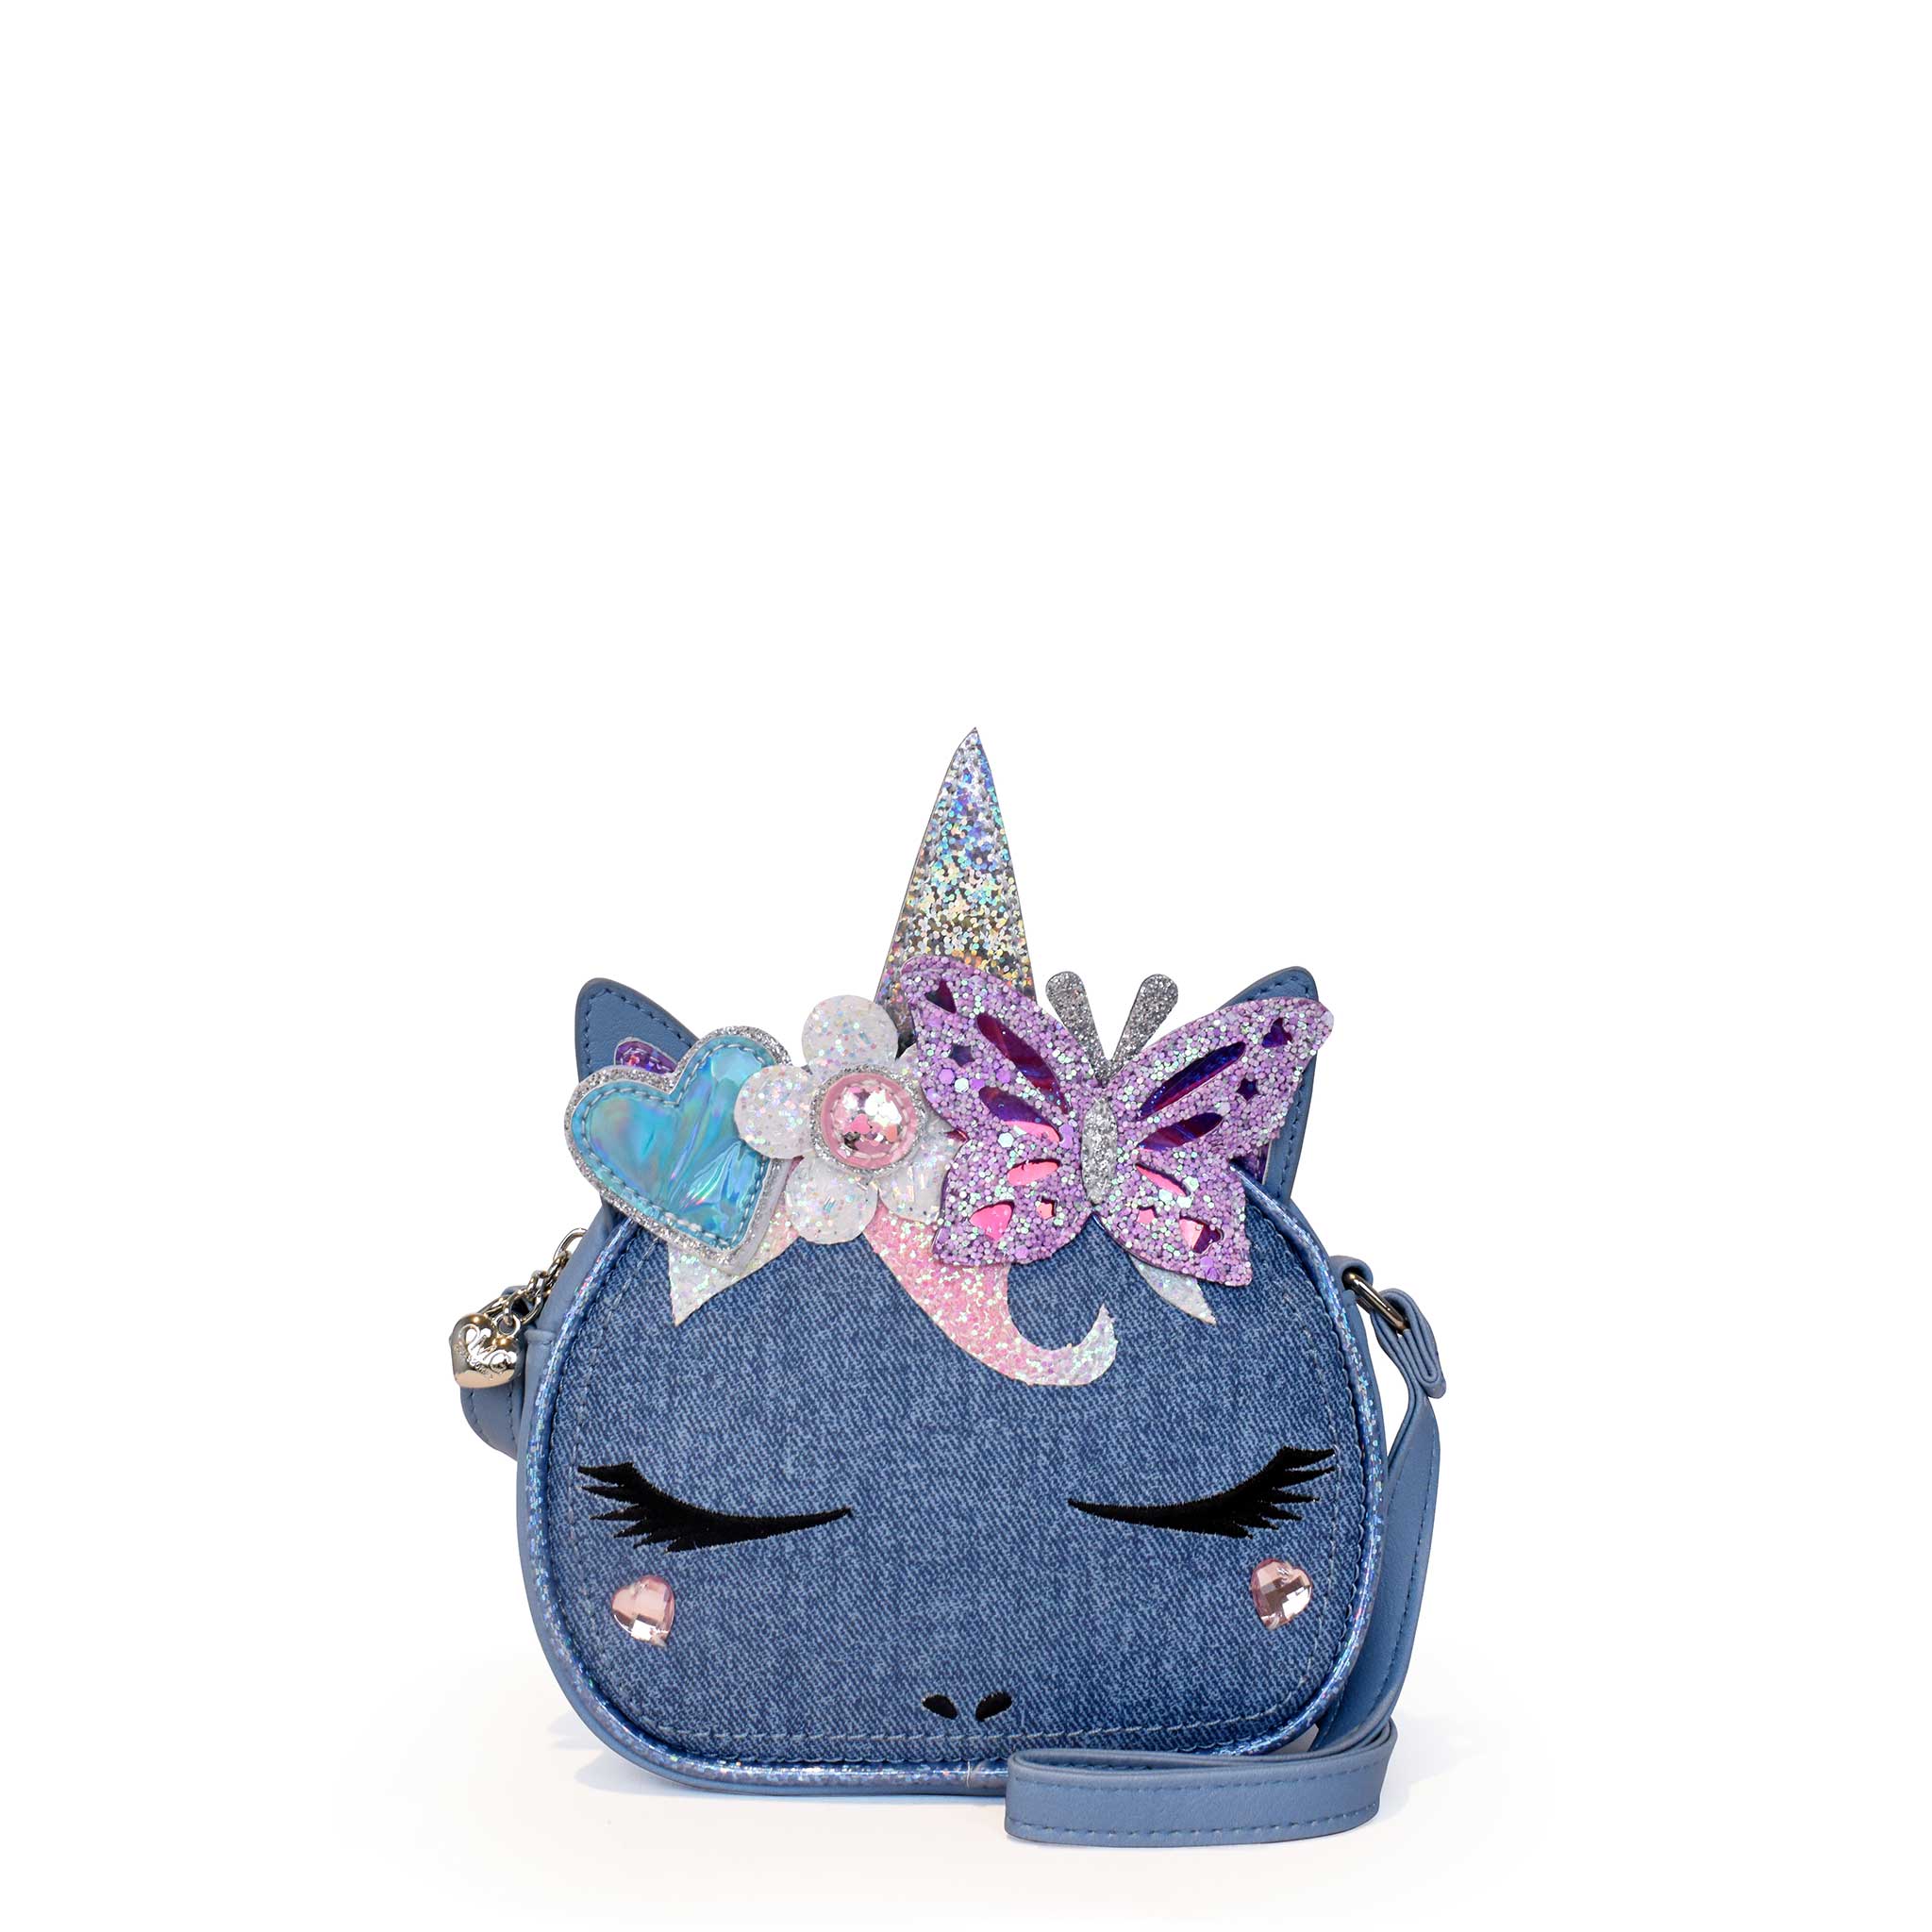 Front View of a Miss Gwen Unicorn Denim Round Crossbody with a appliqué heart, daisy, and butterfly crown